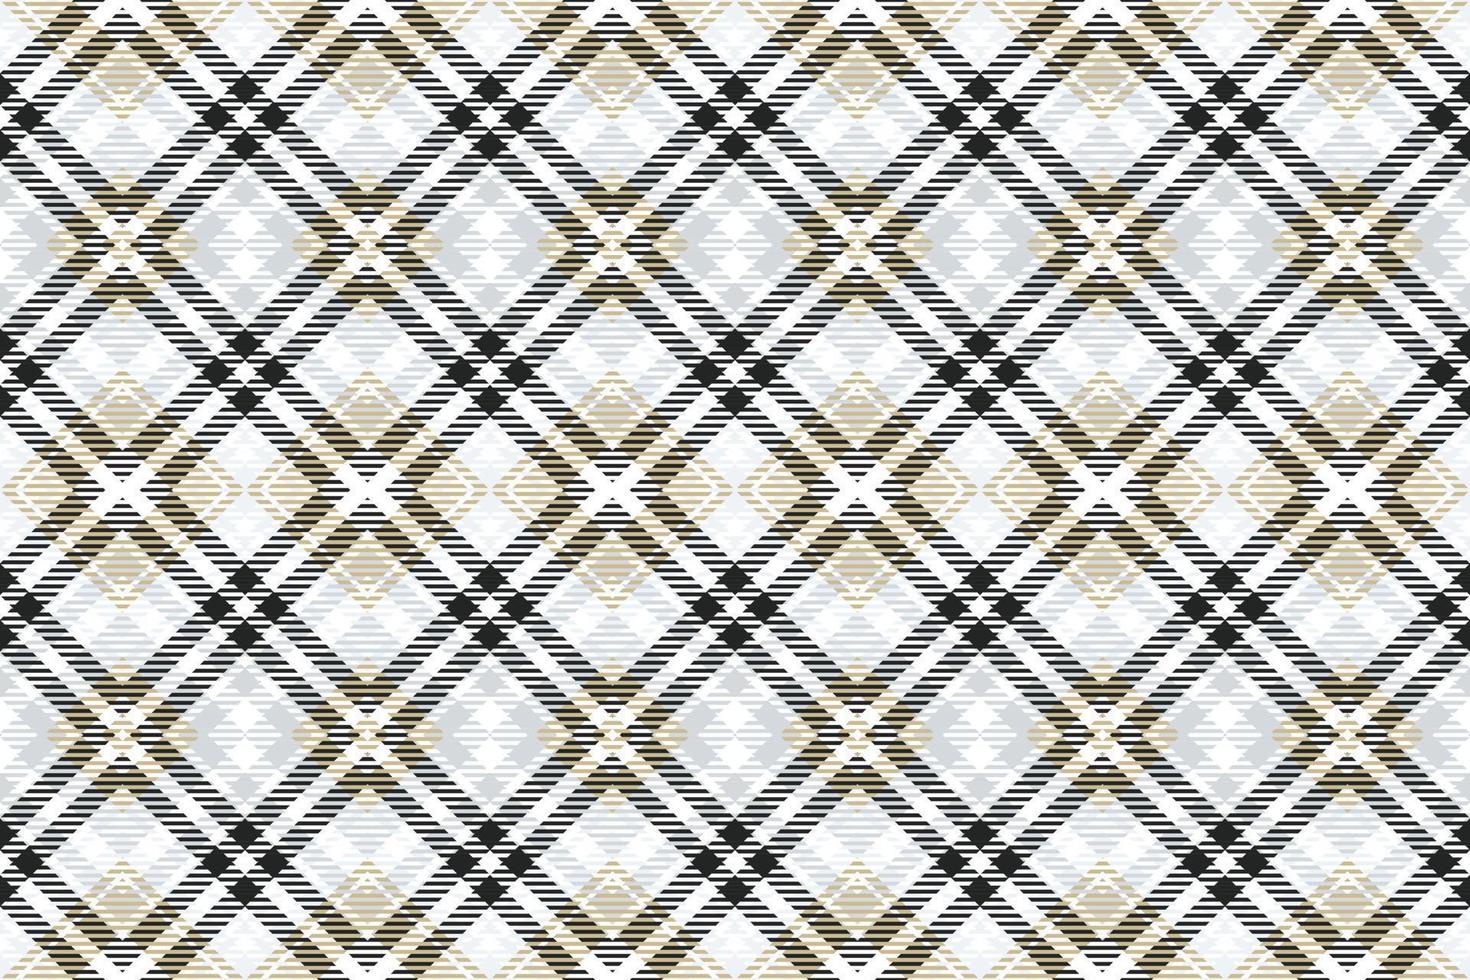 Check Simple plaid pattern is a patterned cloth consisting of criss crossed, horizontal and vertical bands in multiple colours.plaid Seamless For scarf,pyjamas,blanket,duvet,kilt large shawl. vector